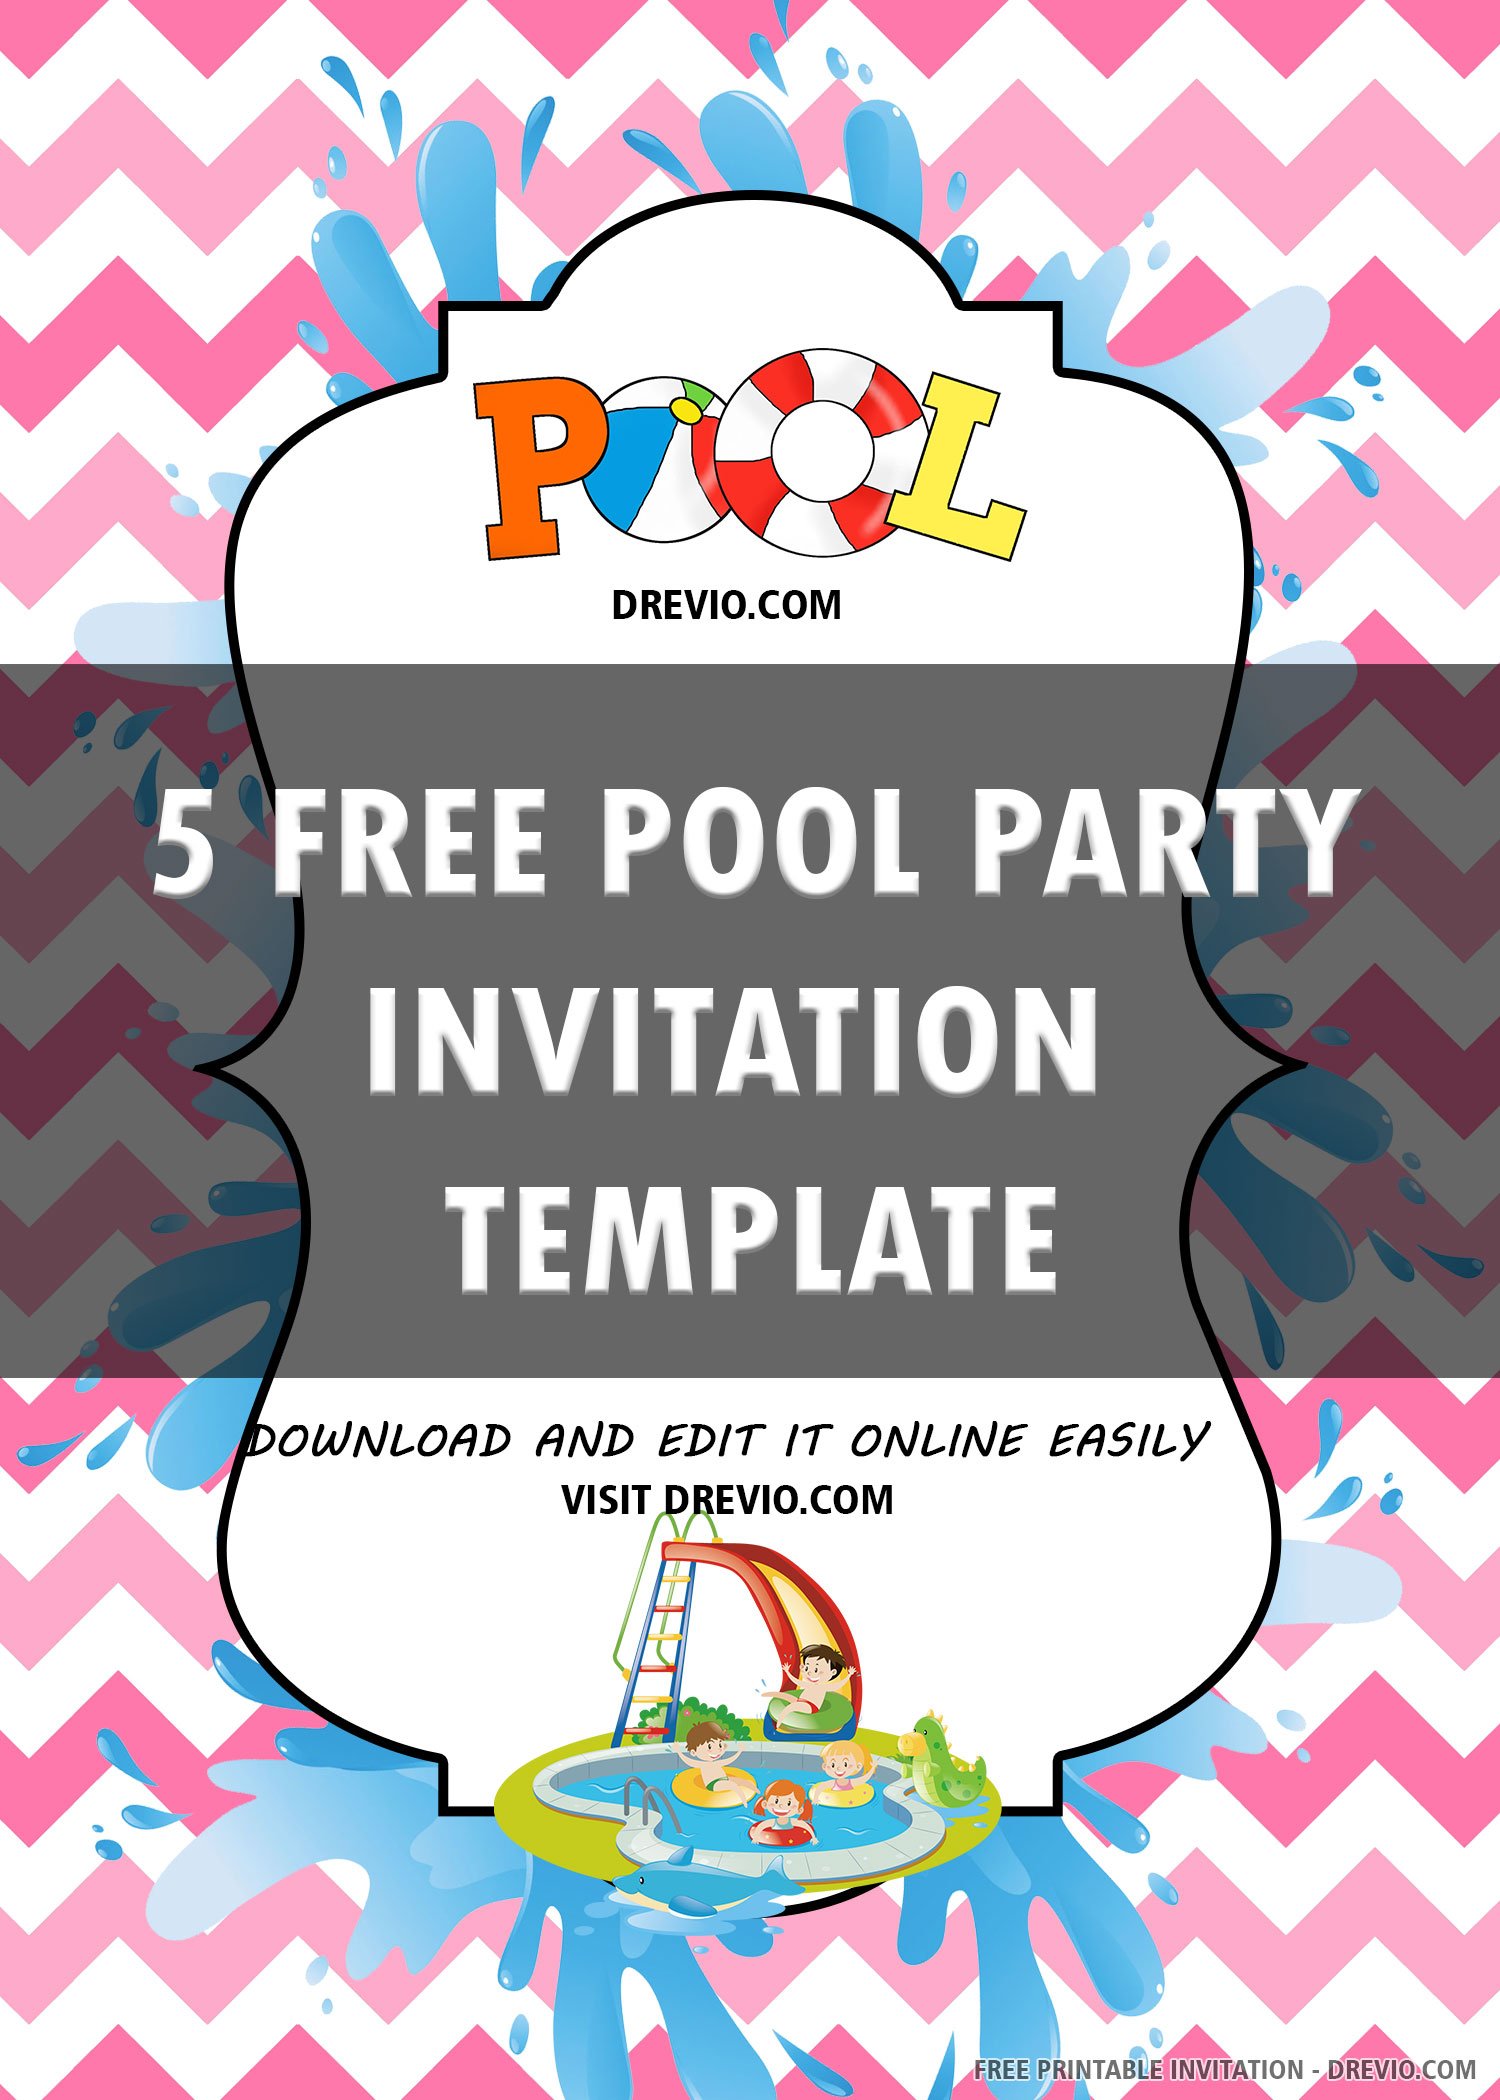 Free Printable Pool Party Invitation Templates | Download Hundreds FREE